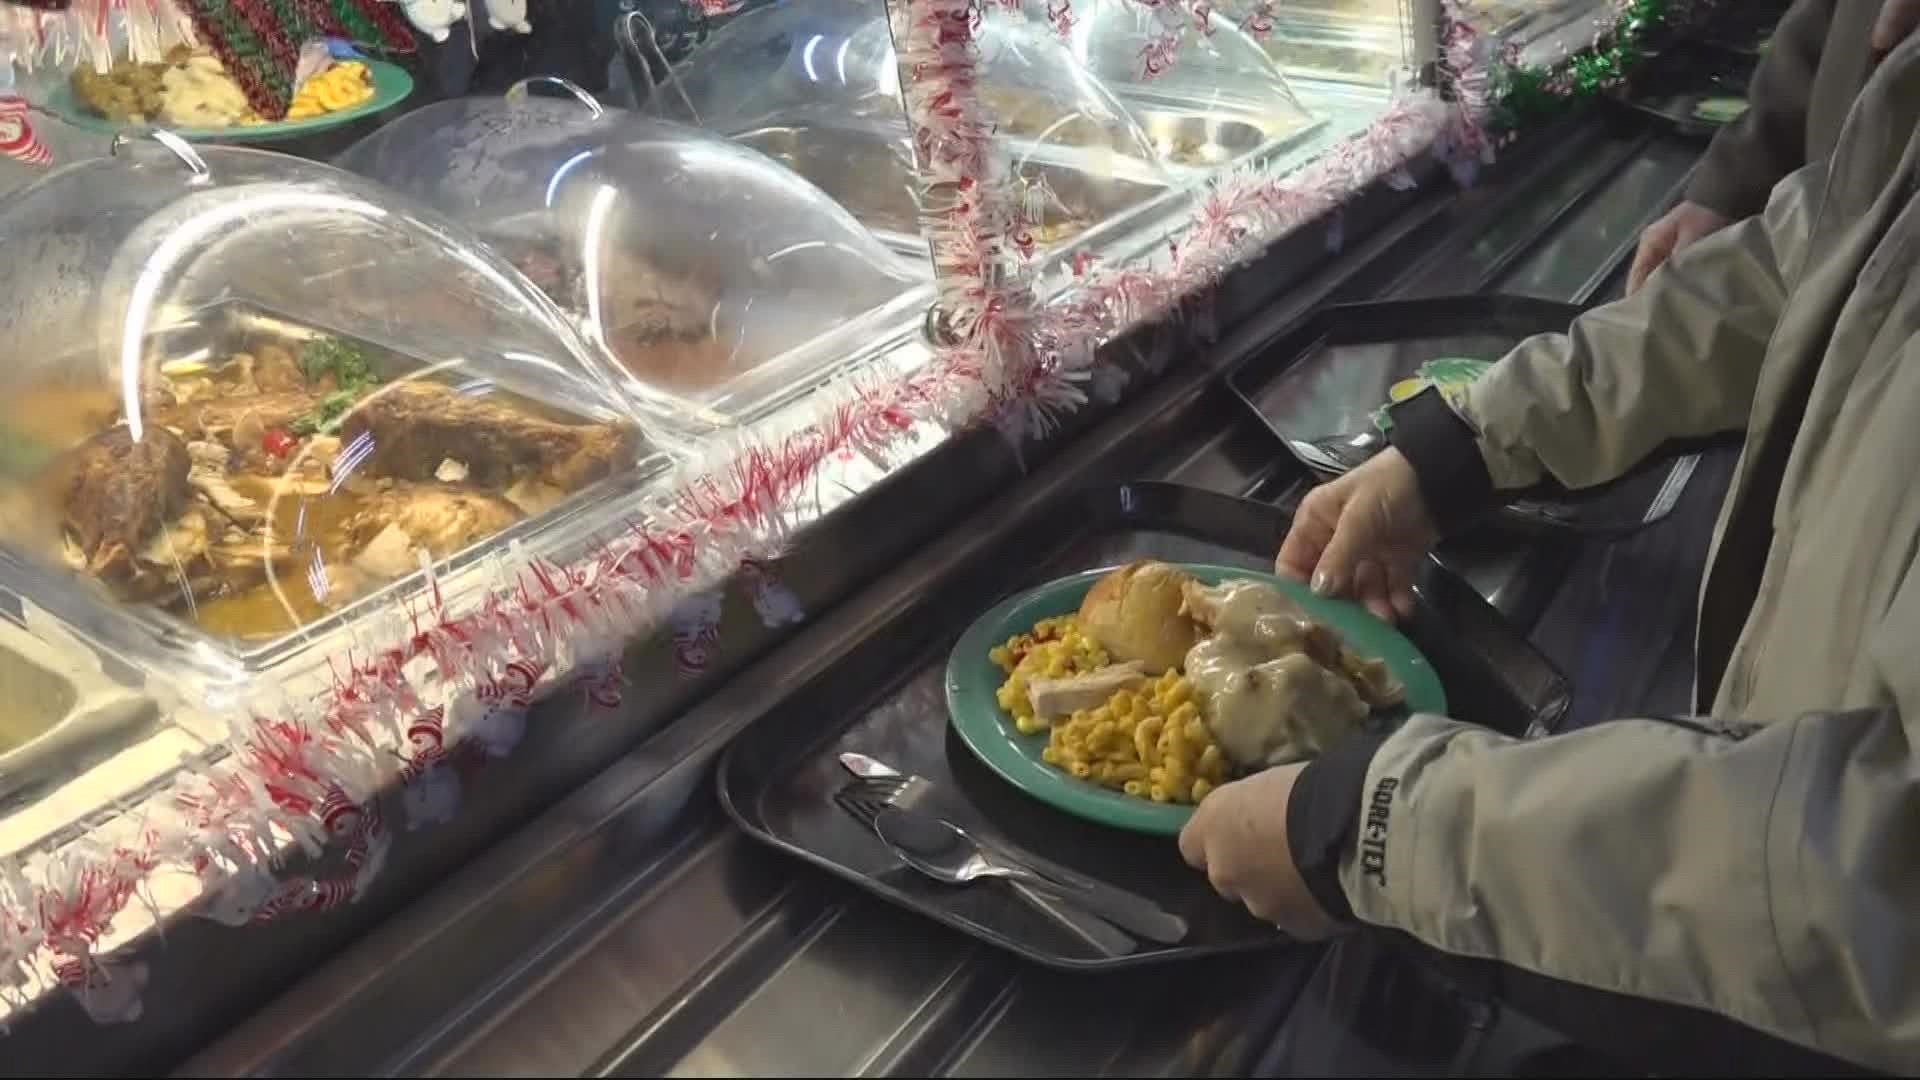 At Naval Station Mayport, a team of culinary specialists woke up early Christmas morning to make sure those living on base had a hot Christmas meal this holiday.